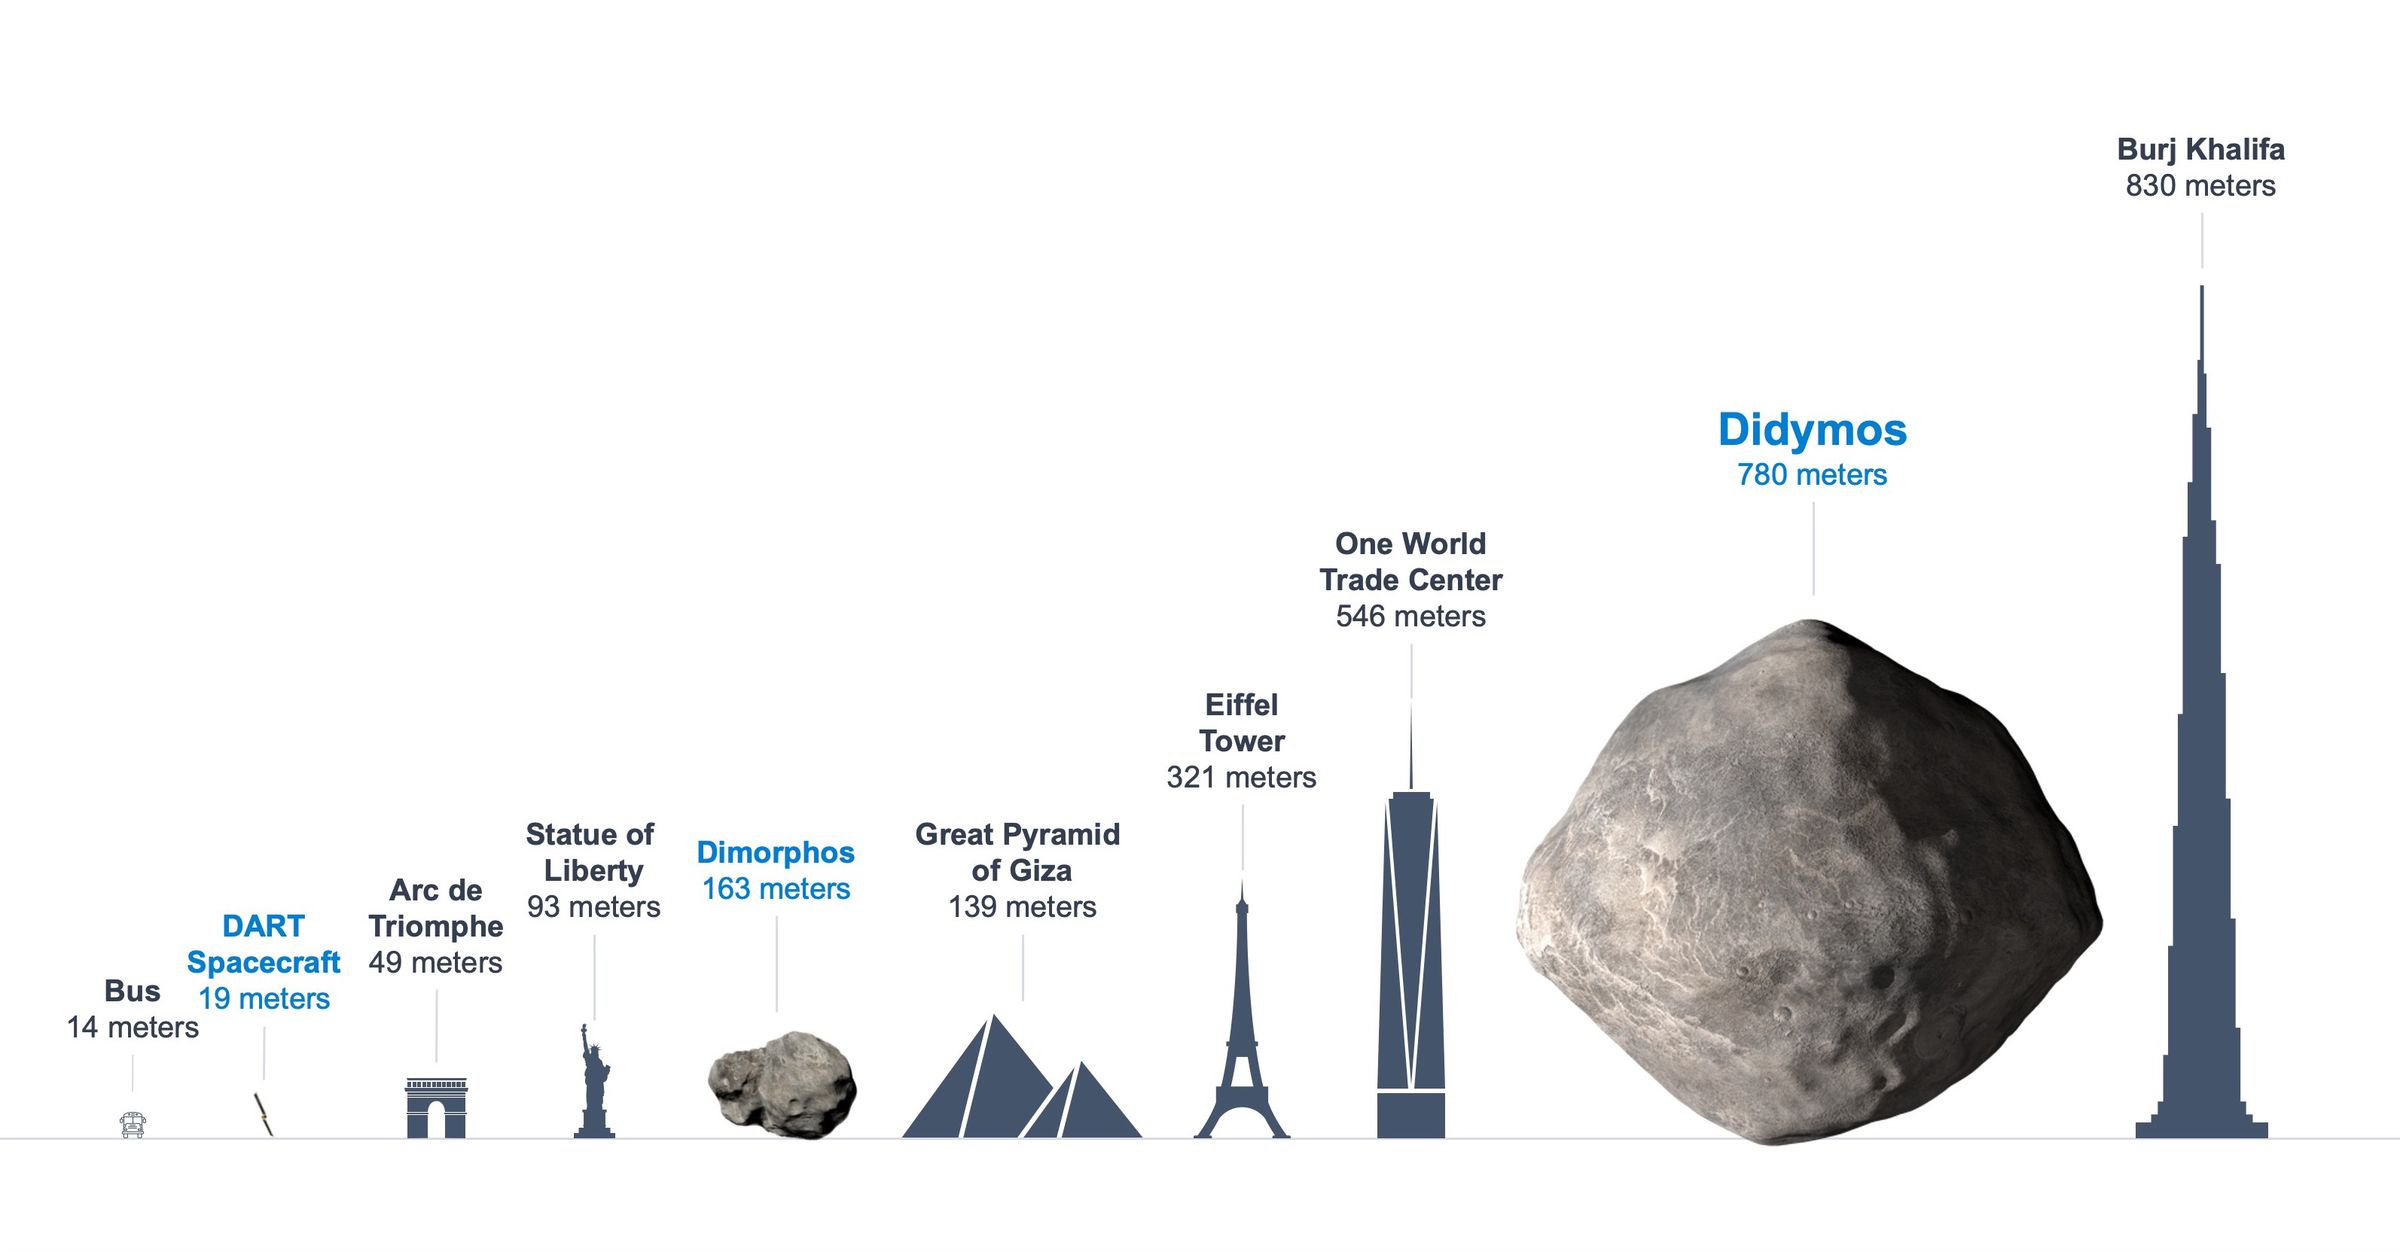 An infographic showing the relative sizes of illustrated objects. On the left is a bus with a label that says 14 meters, next to it is the DART spacecraft, at 19 meters. To the right of DART is the Arc de Triomphe (49 meters), the Statue of Liberty (93 m) and Dimorphos (163 meters). To the right of that is the pyramids (139 meters), the Eiffel tower (321 meters) One World Trade Center (546 meters) Didymos (780 meters) and the Burj Khalifa (830 meters).